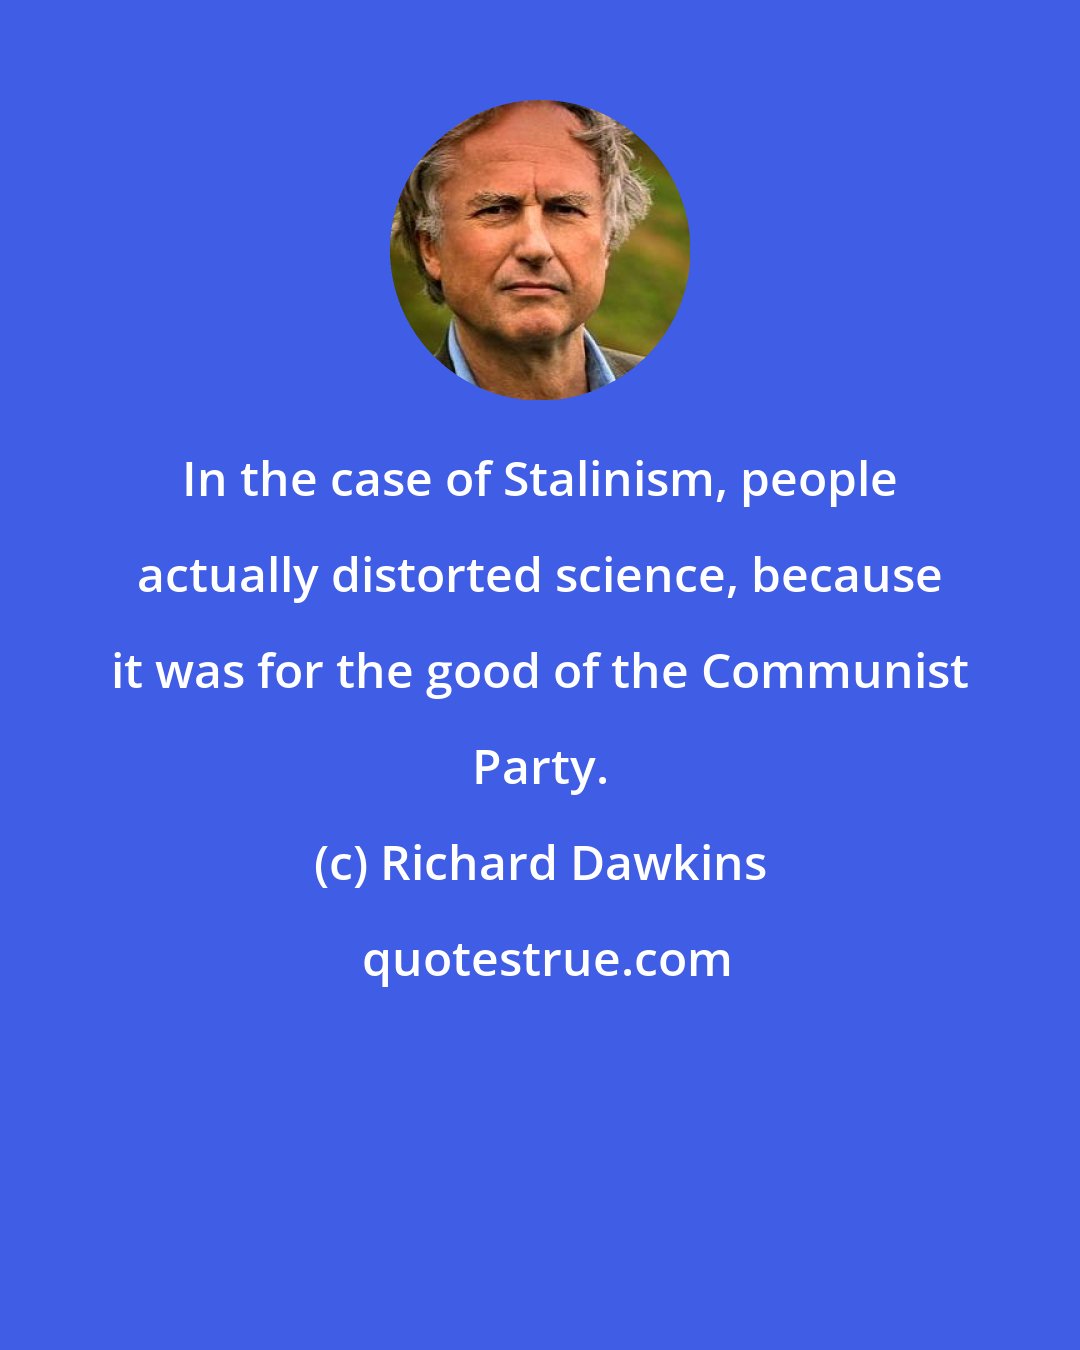 Richard Dawkins: In the case of Stalinism, people actually distorted science, because it was for the good of the Communist Party.